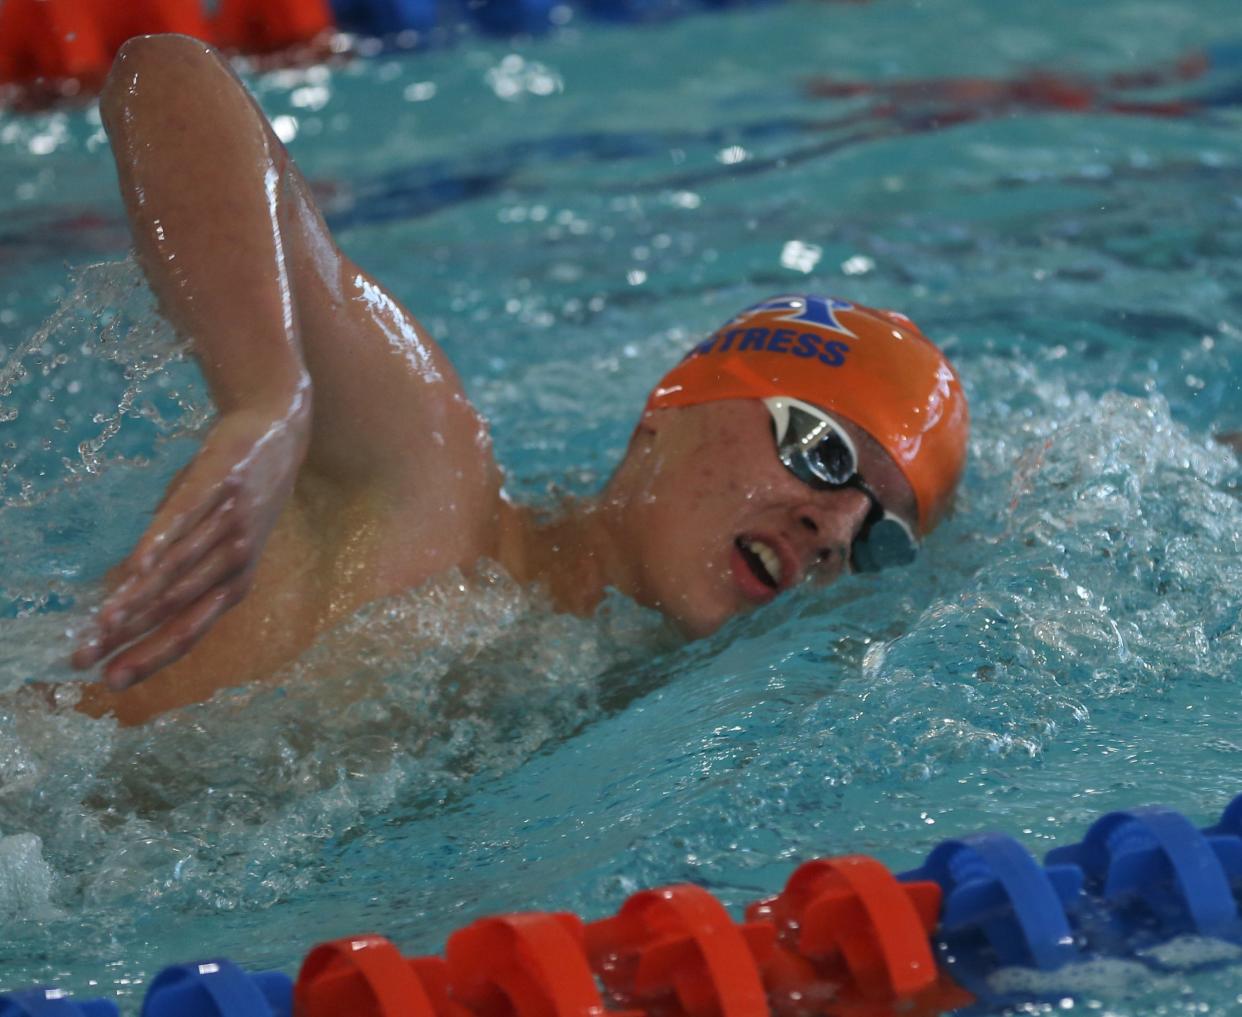 San Angelo Central High School's Cody Fentress competes at the San Angelo Swimming & Diving Invitational at the Gus Clemens Aquatic Center on Saturday, Oct. 30, 2021.